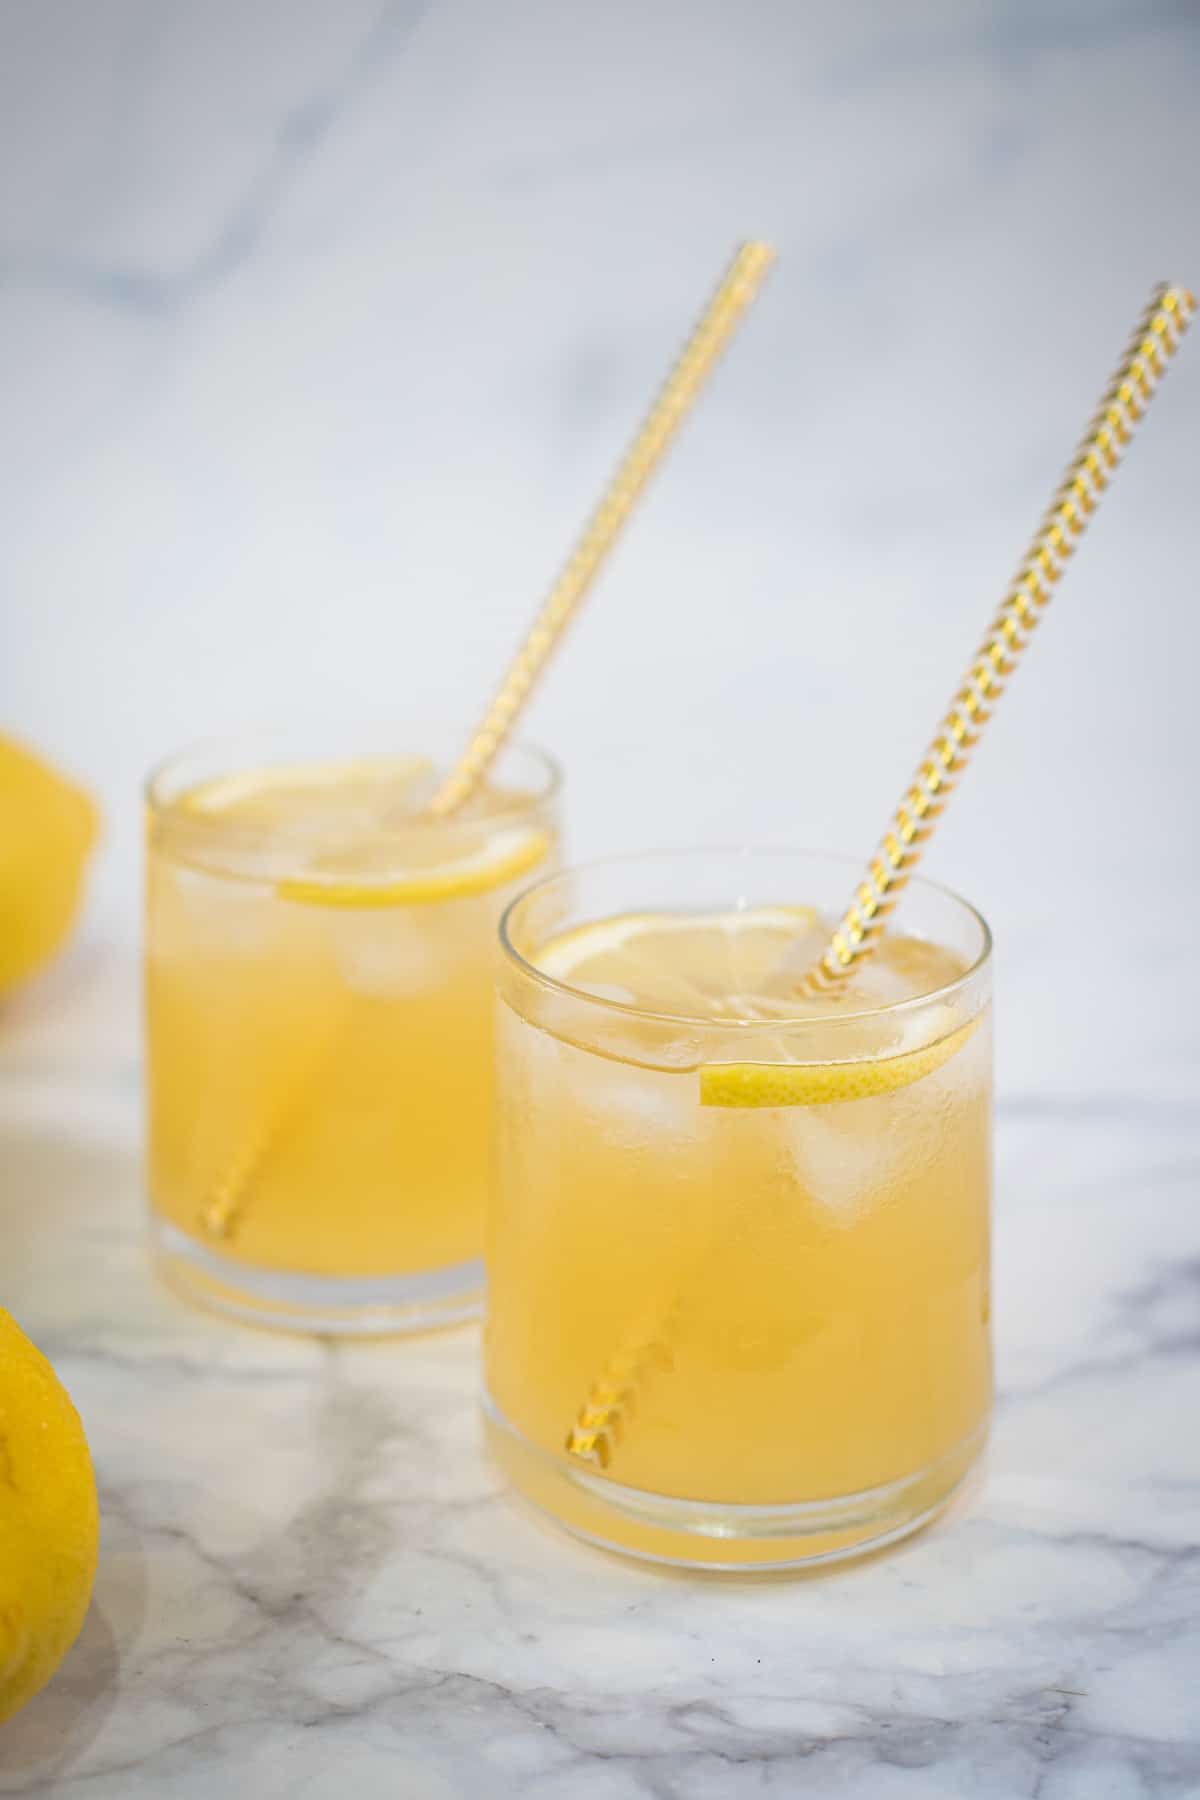 2 cups of lemonade with gold stripes straws.